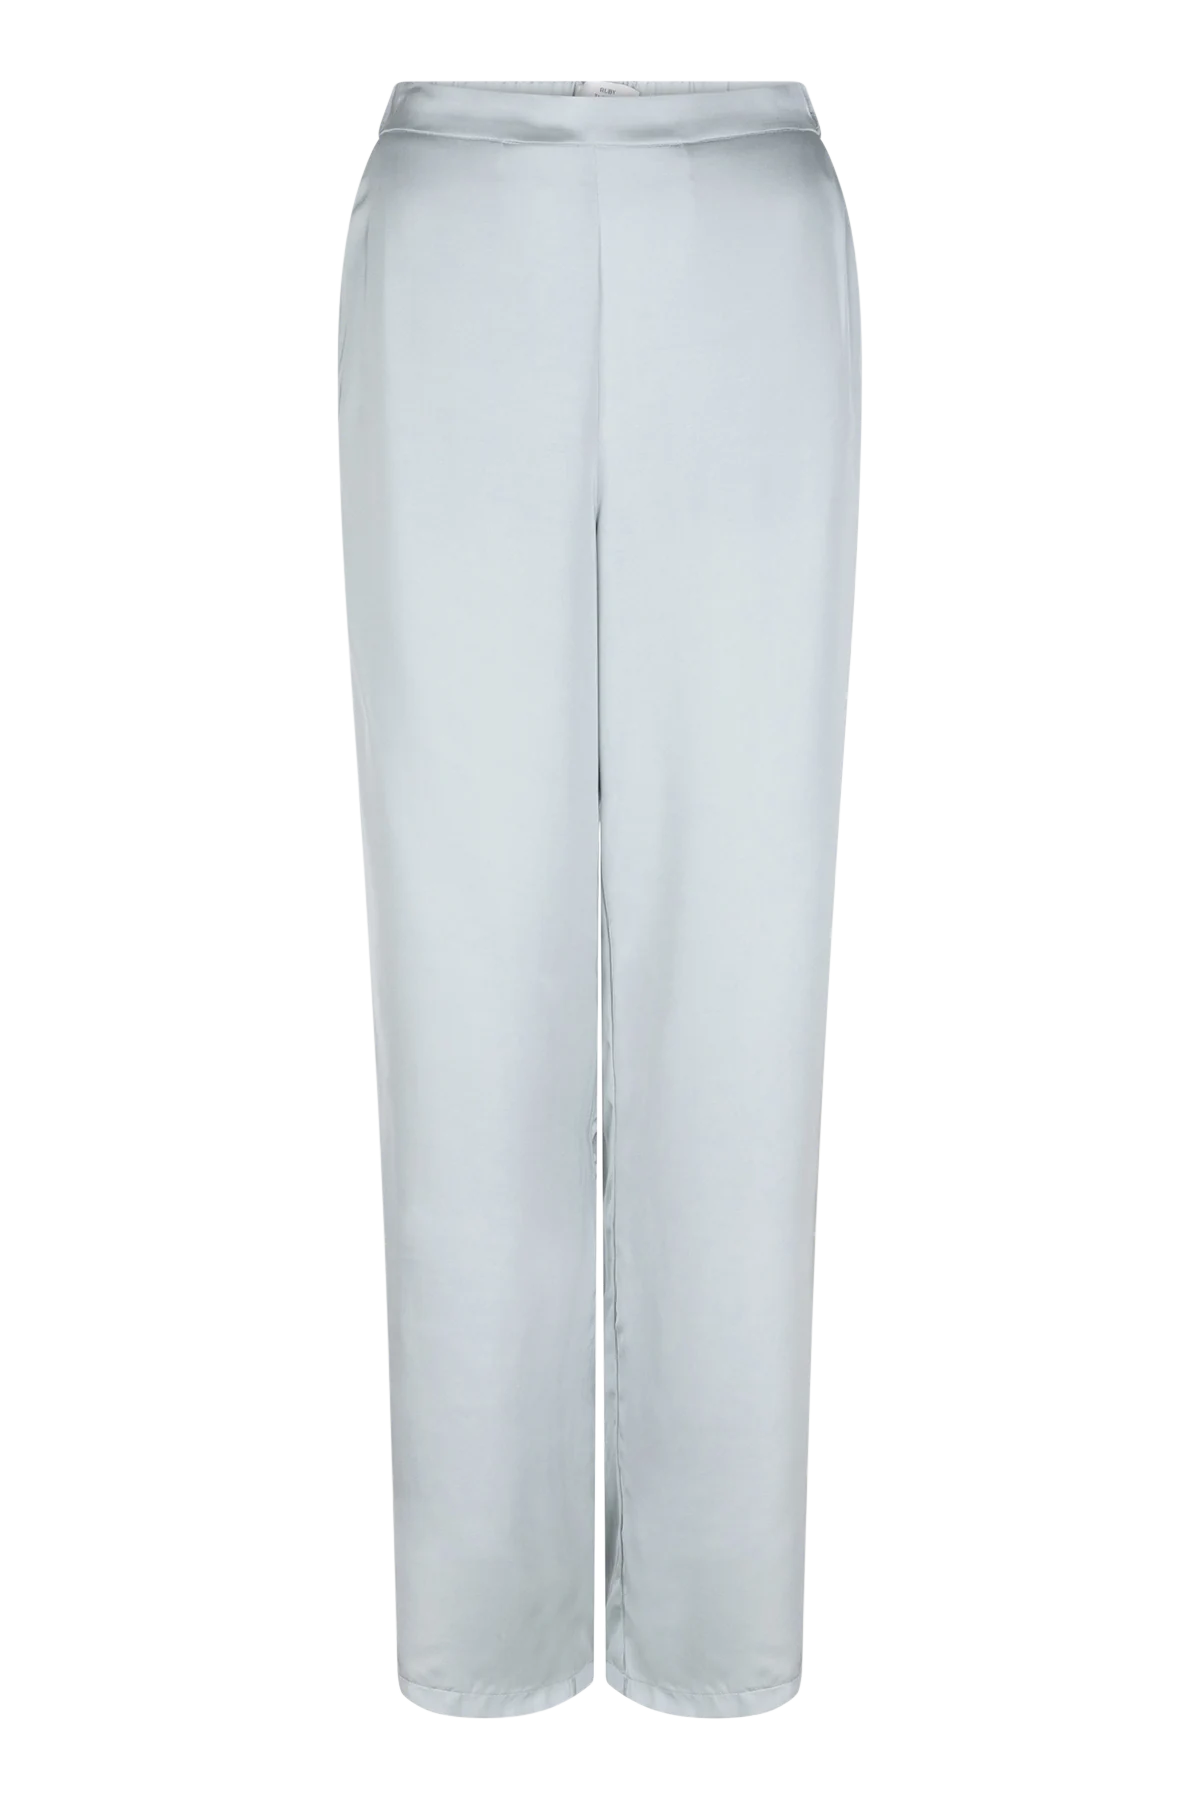 Roona Trousers t402 1685